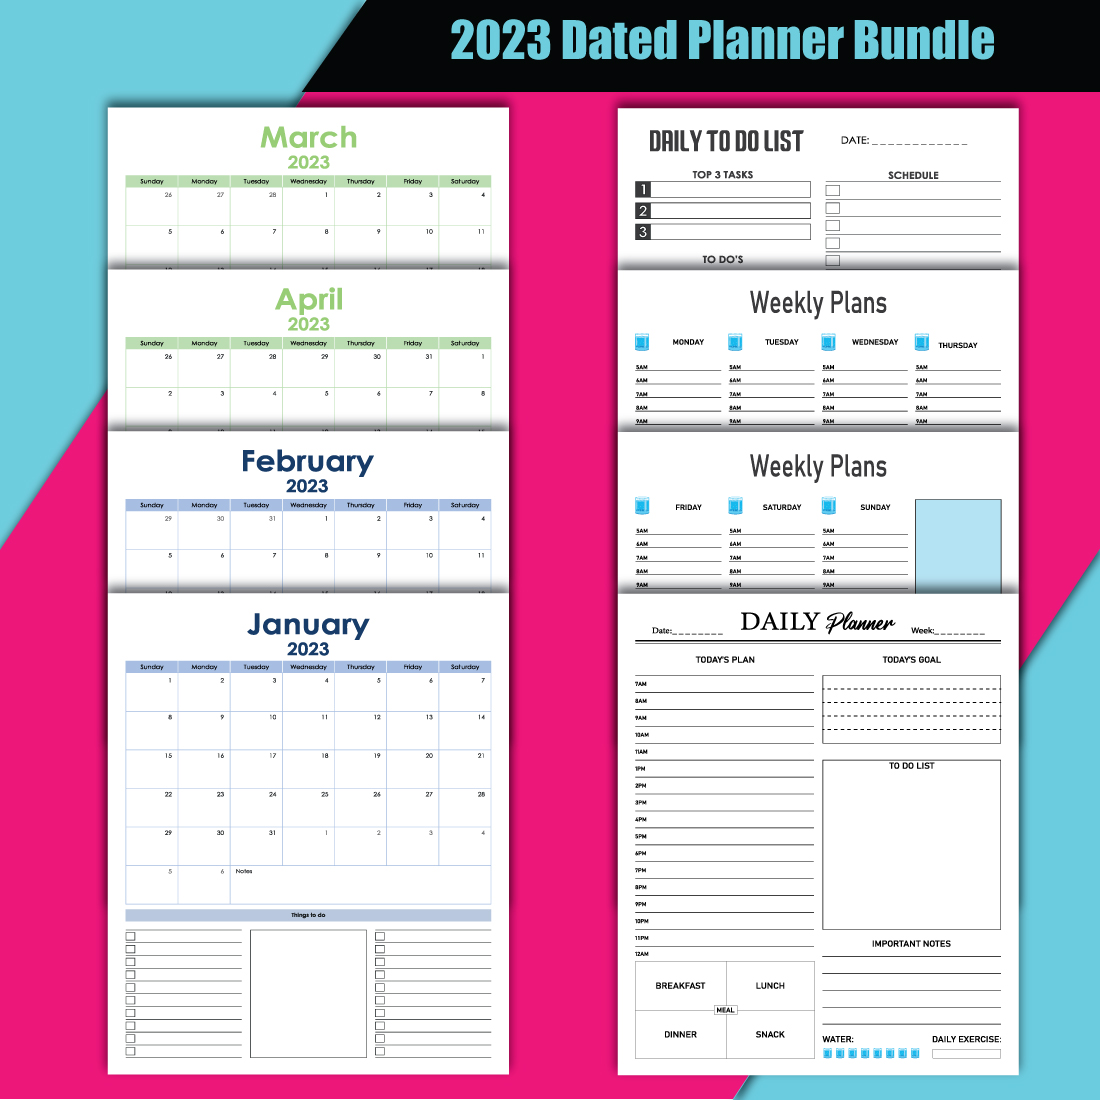 2023 Dated Planner Bundle cover image.